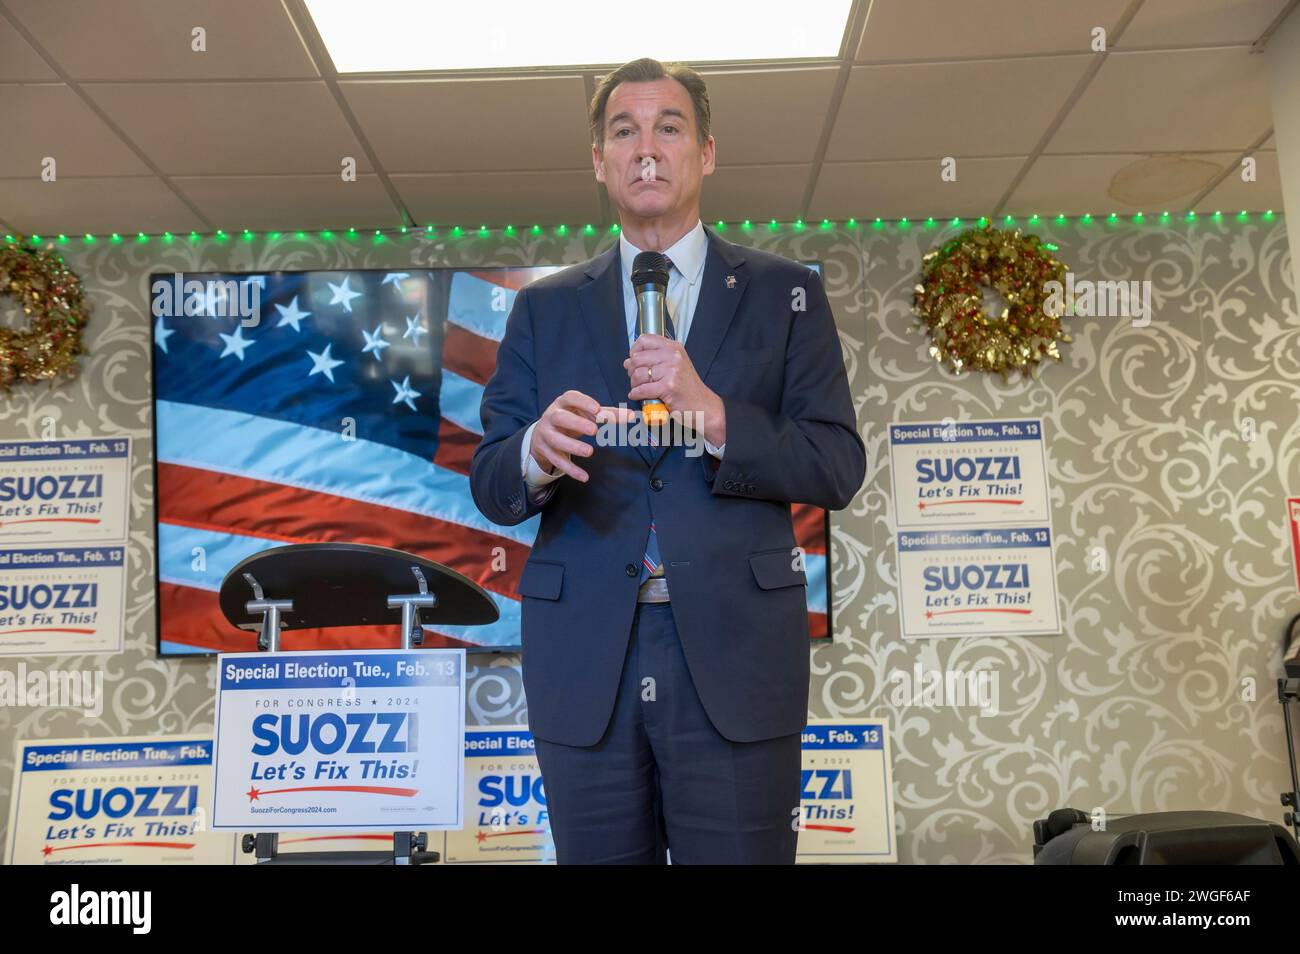 New York, New York, USA. 4th Feb, 2024. (NEW) Tom Suozzi Holds A Campaign Rally. February 4, 2024, Floral Park, New York, USA: Tom Suozzi speaks at an election rally on February 04, 2024 in Floral Park, New York. Early voting started Saturday February 3 for special election between Democrat's candidate former Rep. Tom Suozzi and Republican's candidate Mazi Pilip in the New York's 3rd congressional district to replace expelled Rep. George Santos. (Credit: M10s/TheNews2) (Foto: M10s/Thenews2/Zumapress) (Credit Image: © Ron Adar/TheNEWS2 via ZUMA Press Wire) EDITORIAL U Stock Photo